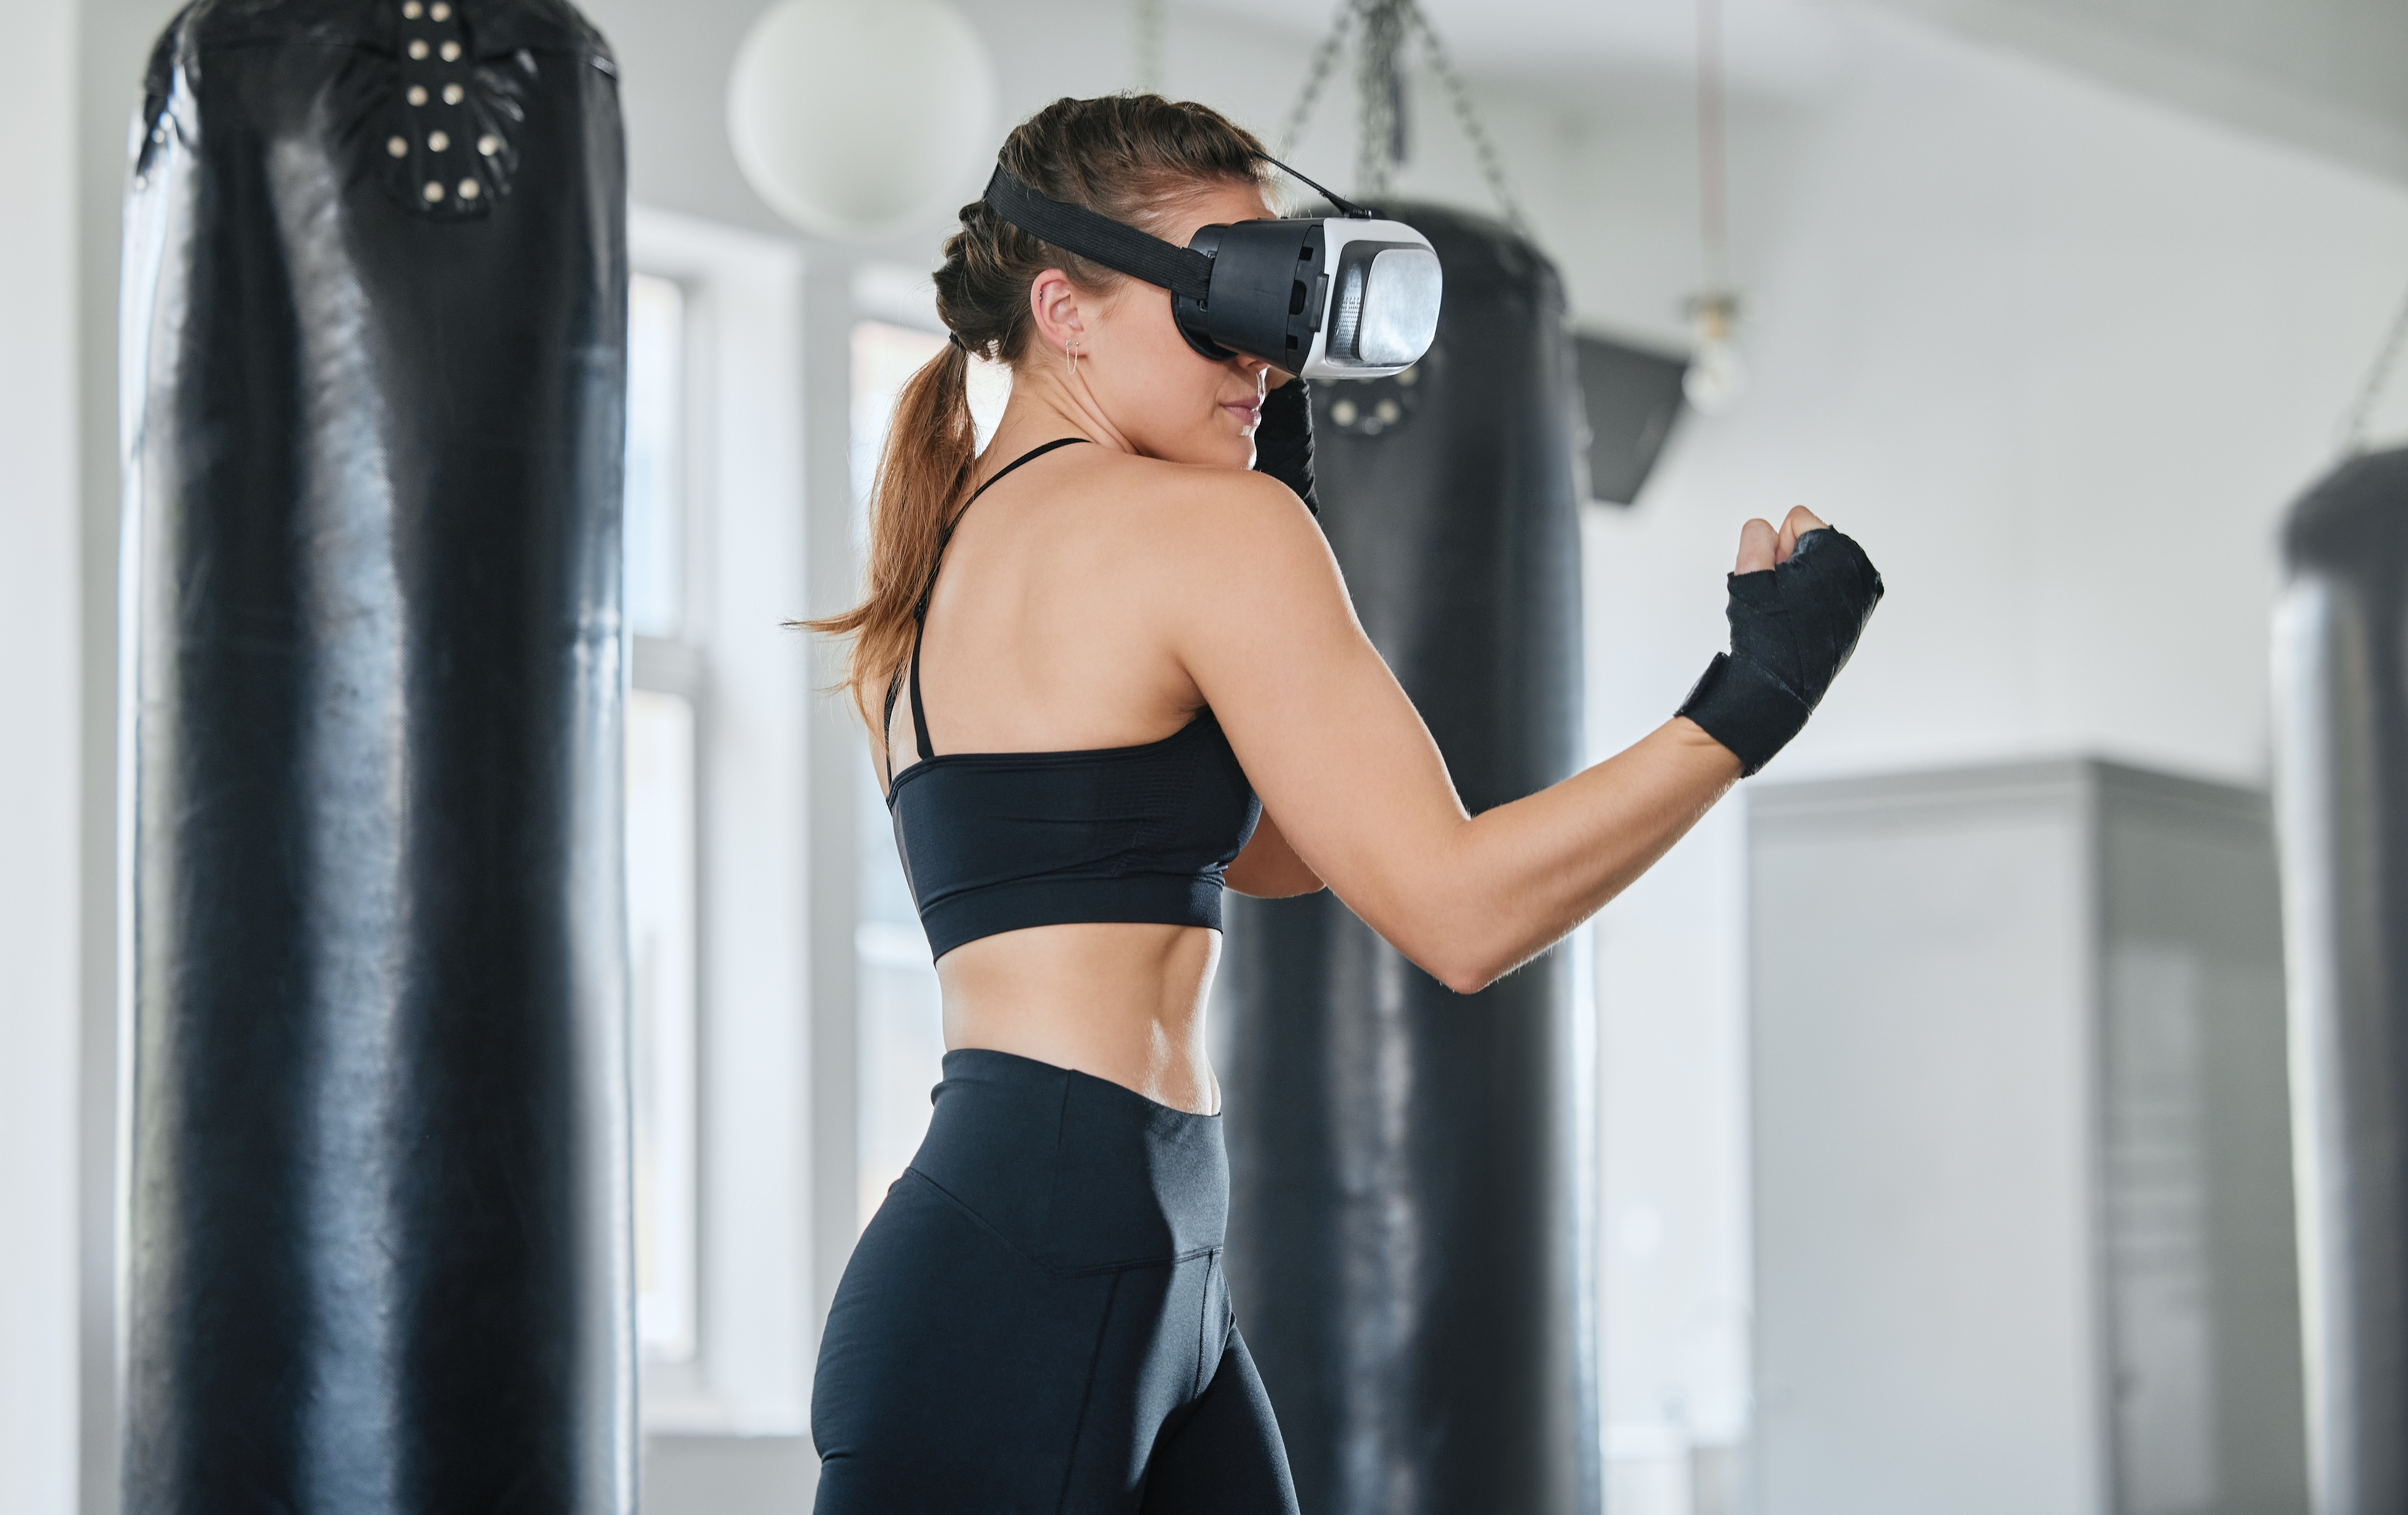 Female boxer using VR goggles to train, exercise and stay fit and healthy in a modern fitness gym.